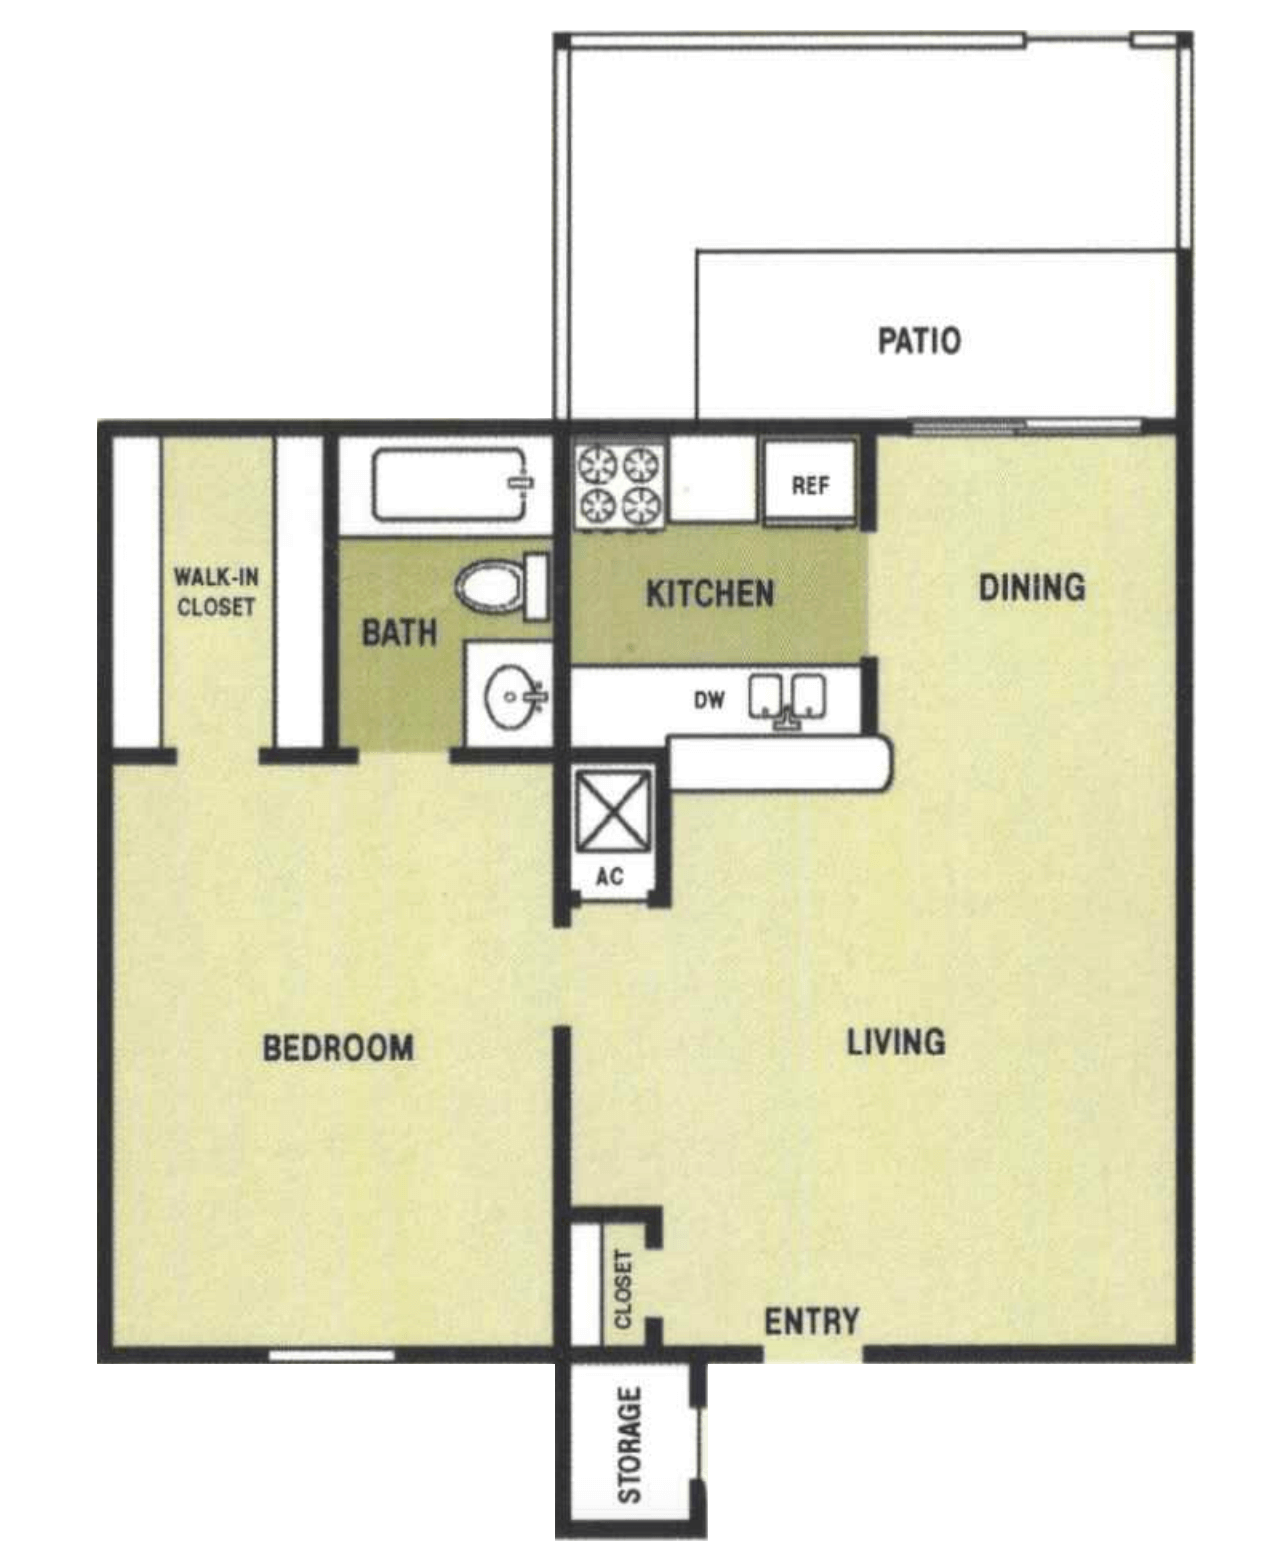 A 1×1 A unit with 1 Bedrooms and 1 Bathrooms with area of 545 sq. ft